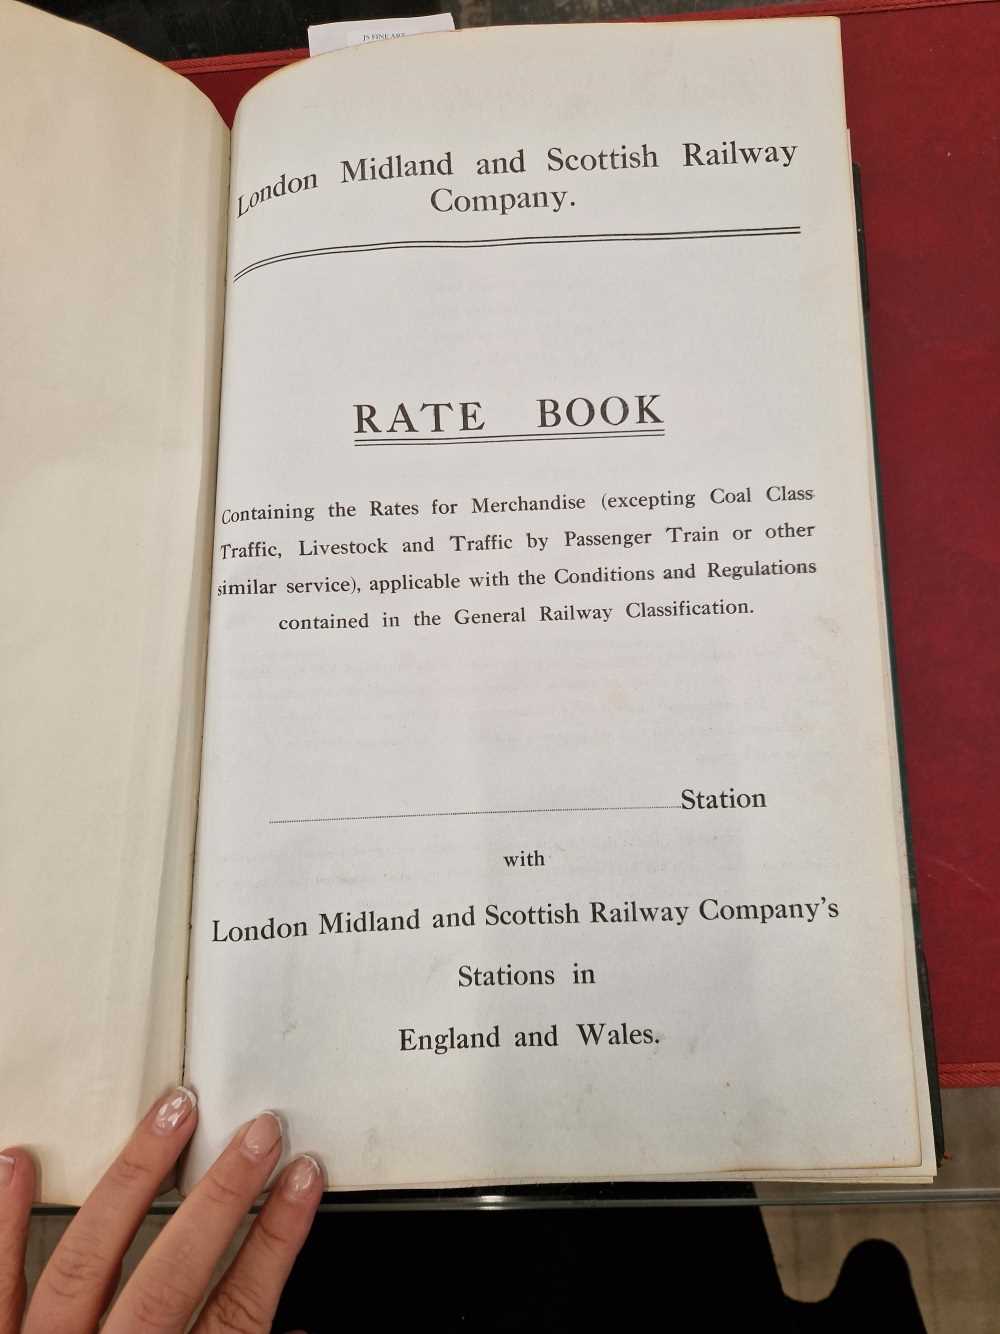 London Midland and Scottish Railway Company, rate book, in unused condition.